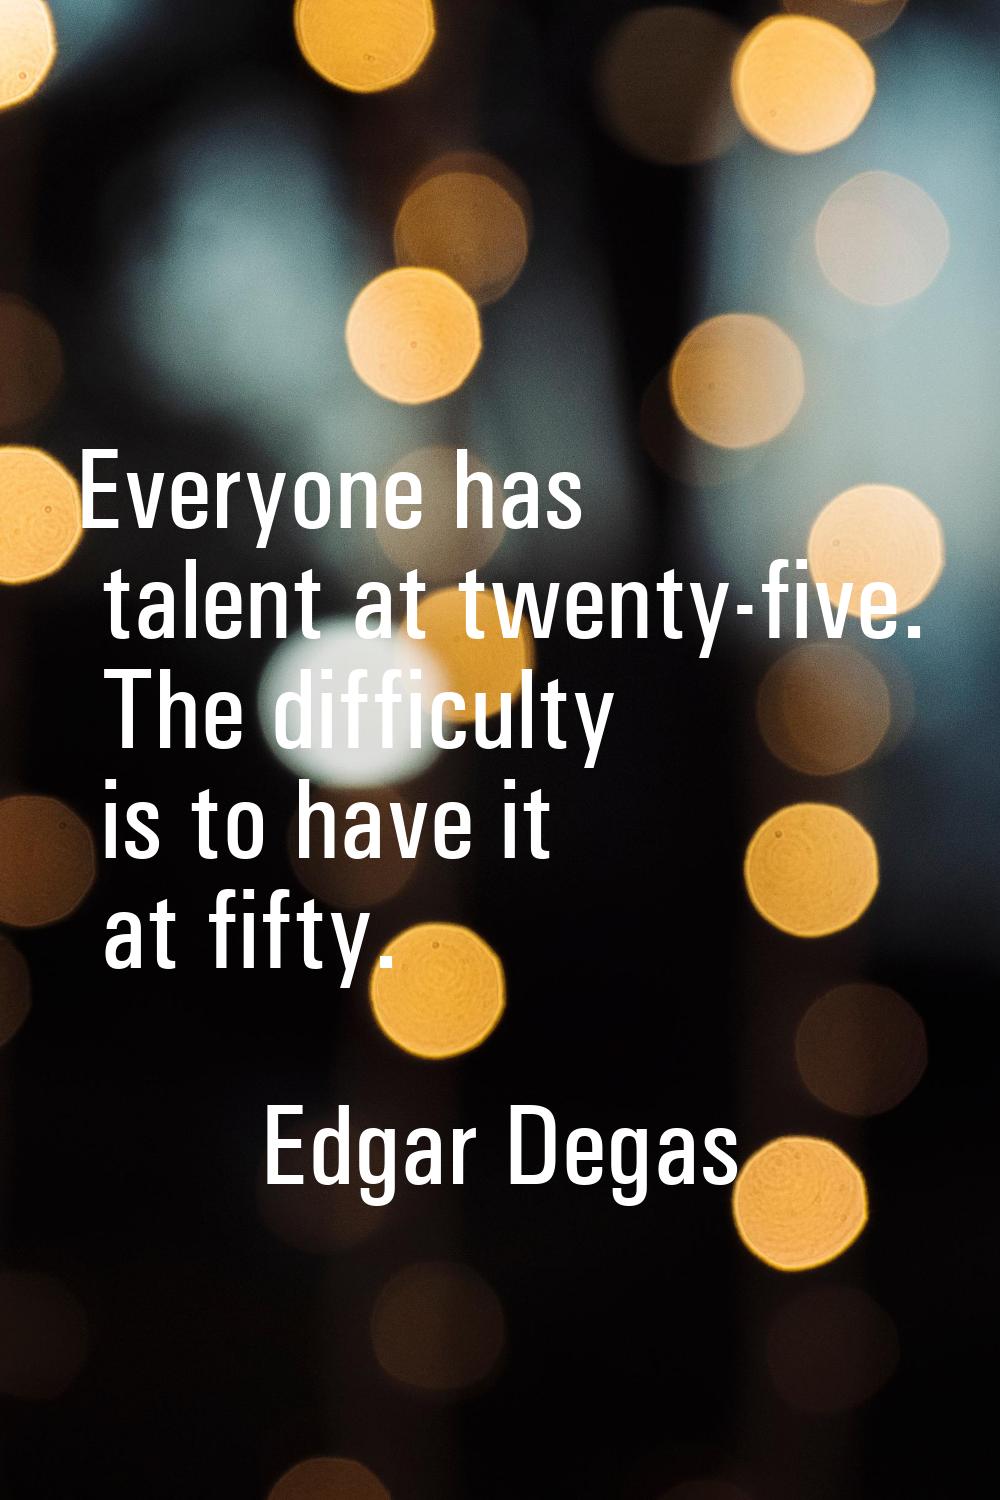 Everyone has talent at twenty-five. The difficulty is to have it at fifty.